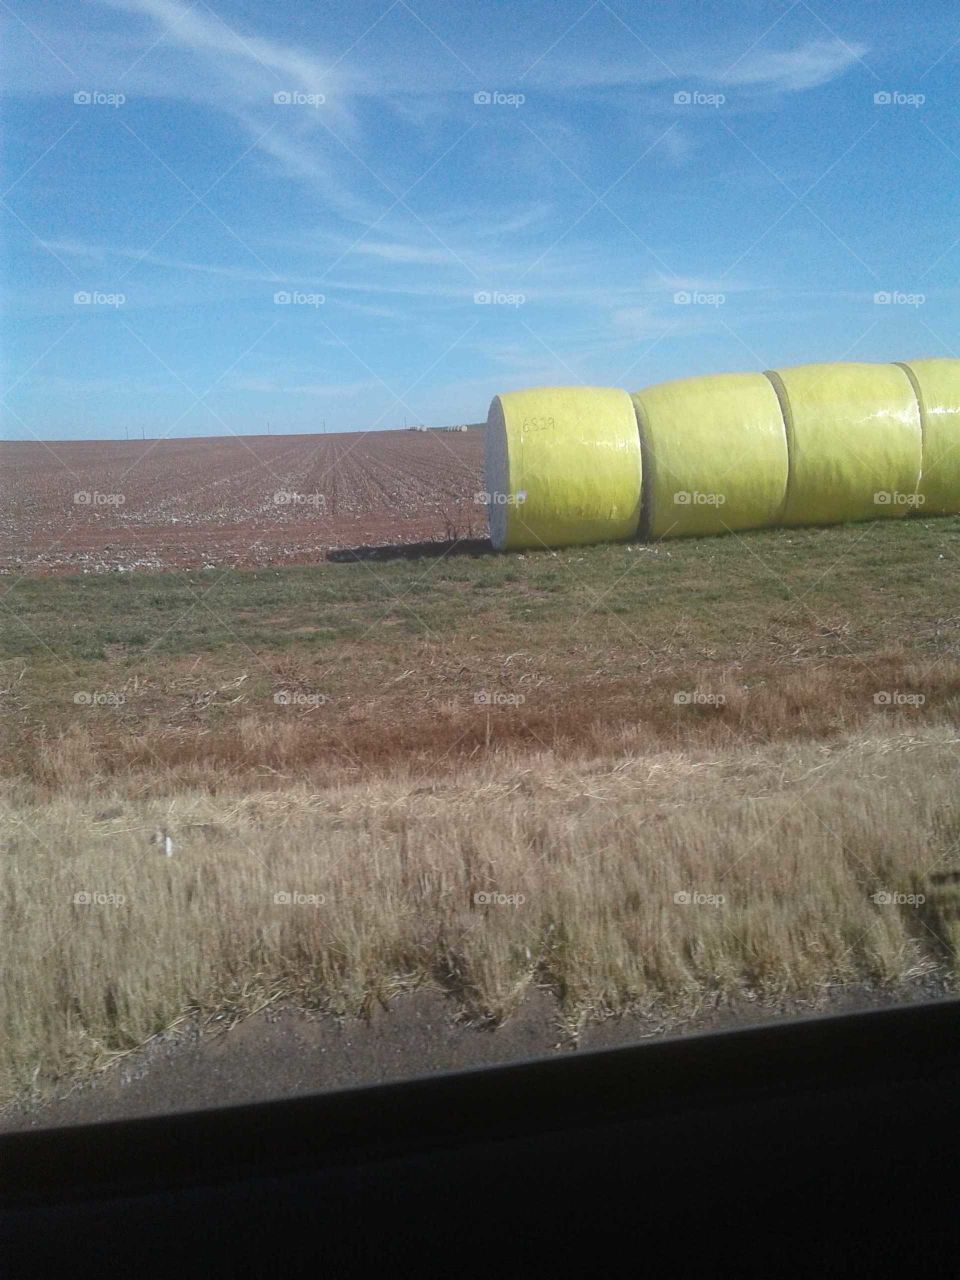 Altus Oklahoma bail of Cotton in field Red dirt